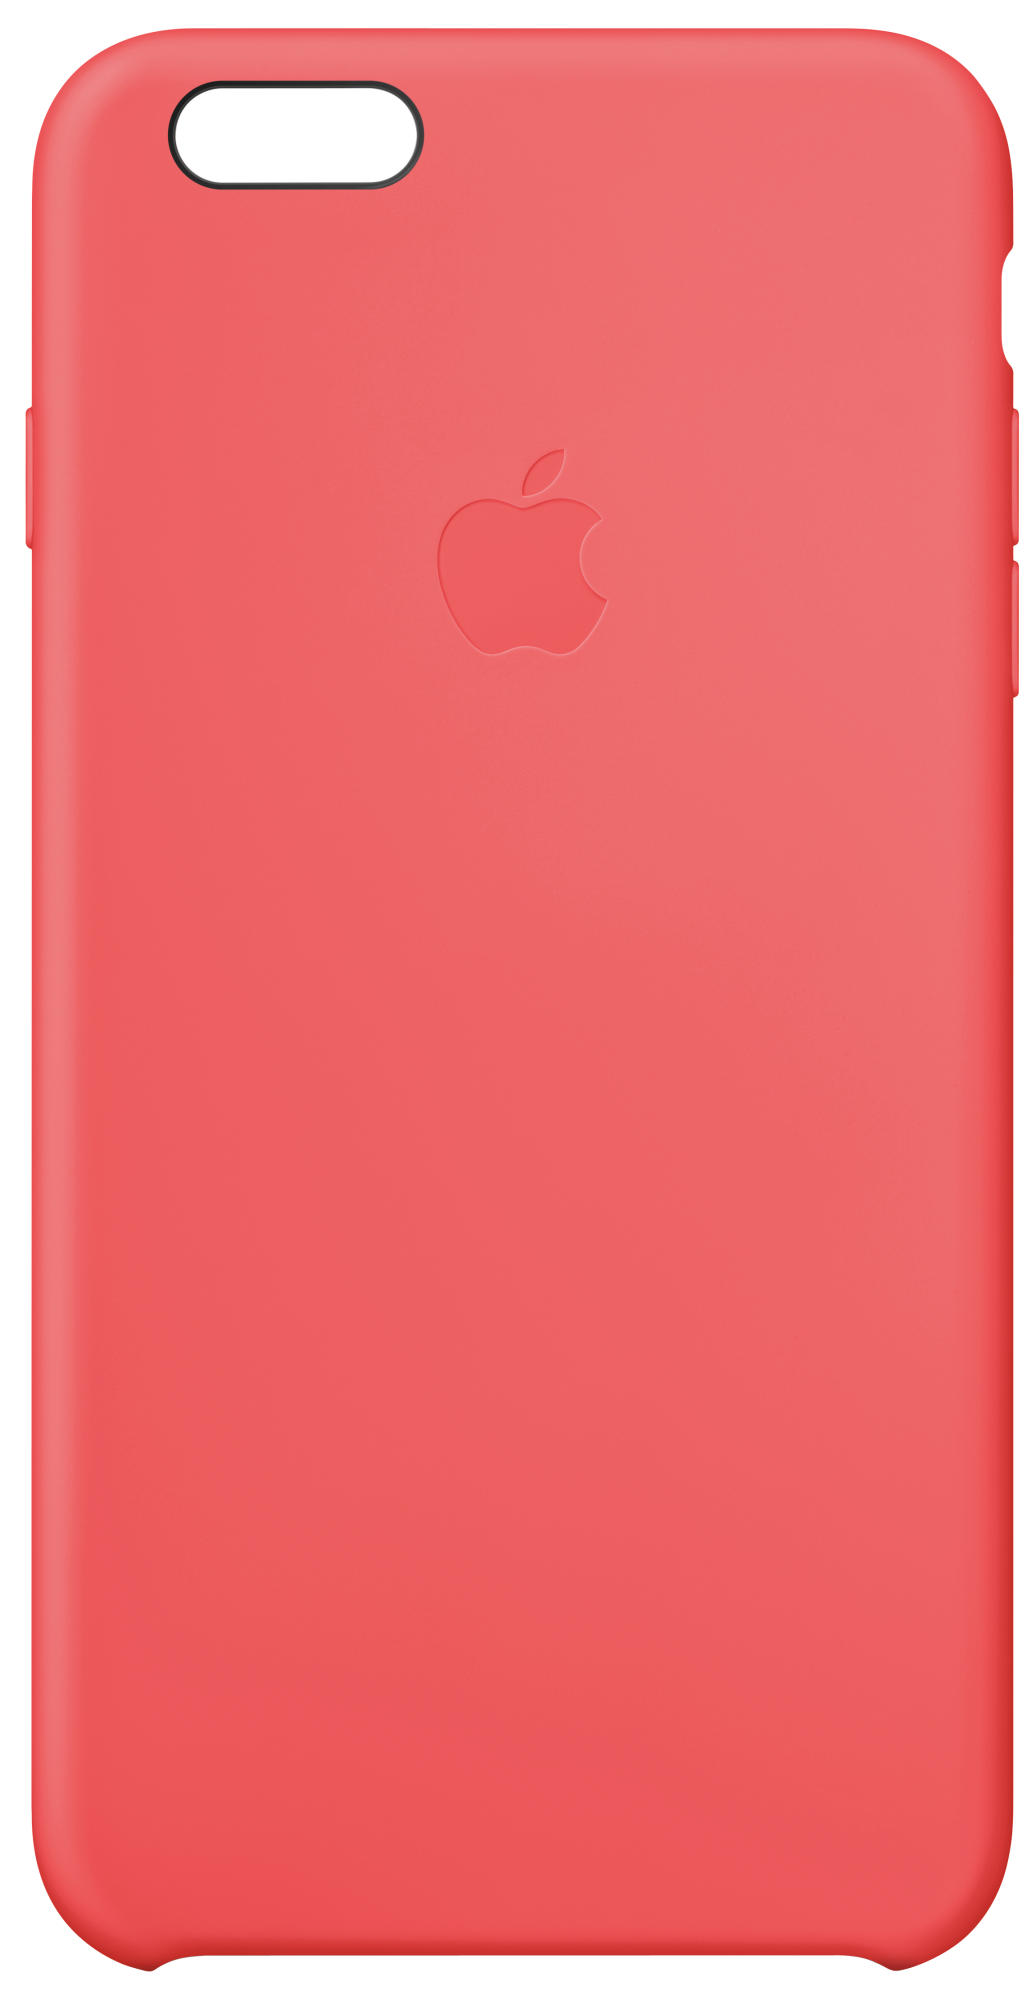 iPhone Apple, 6 Plus, Pink Backcover, MGXW2ZM/A, APPLE